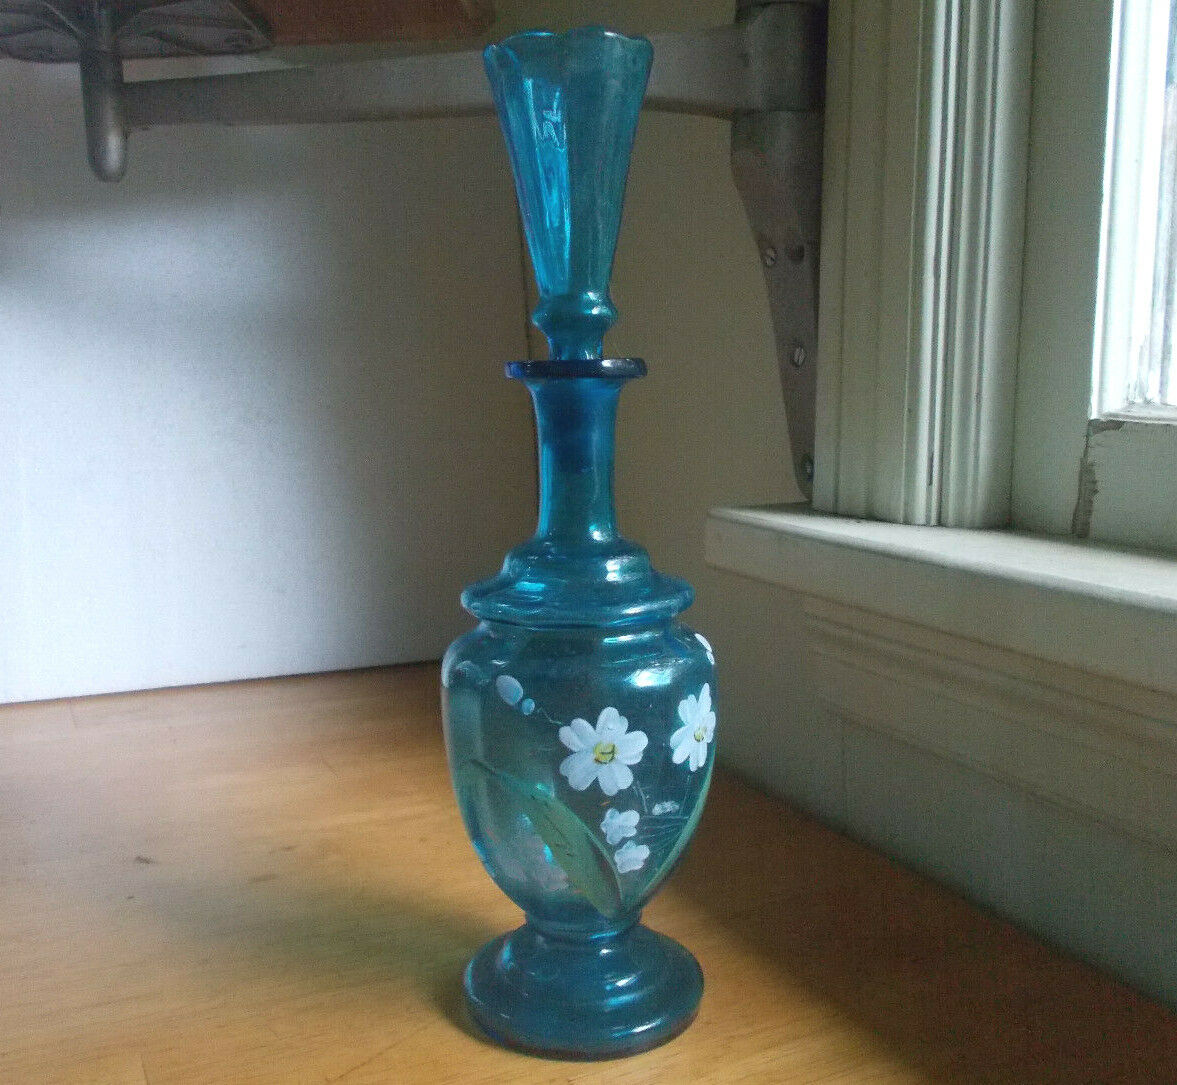 1880s PRETTY SAPPHIRE BLUE PONTILED TOILET WATER BOTTLE WITH ORIGINAL STOPPER